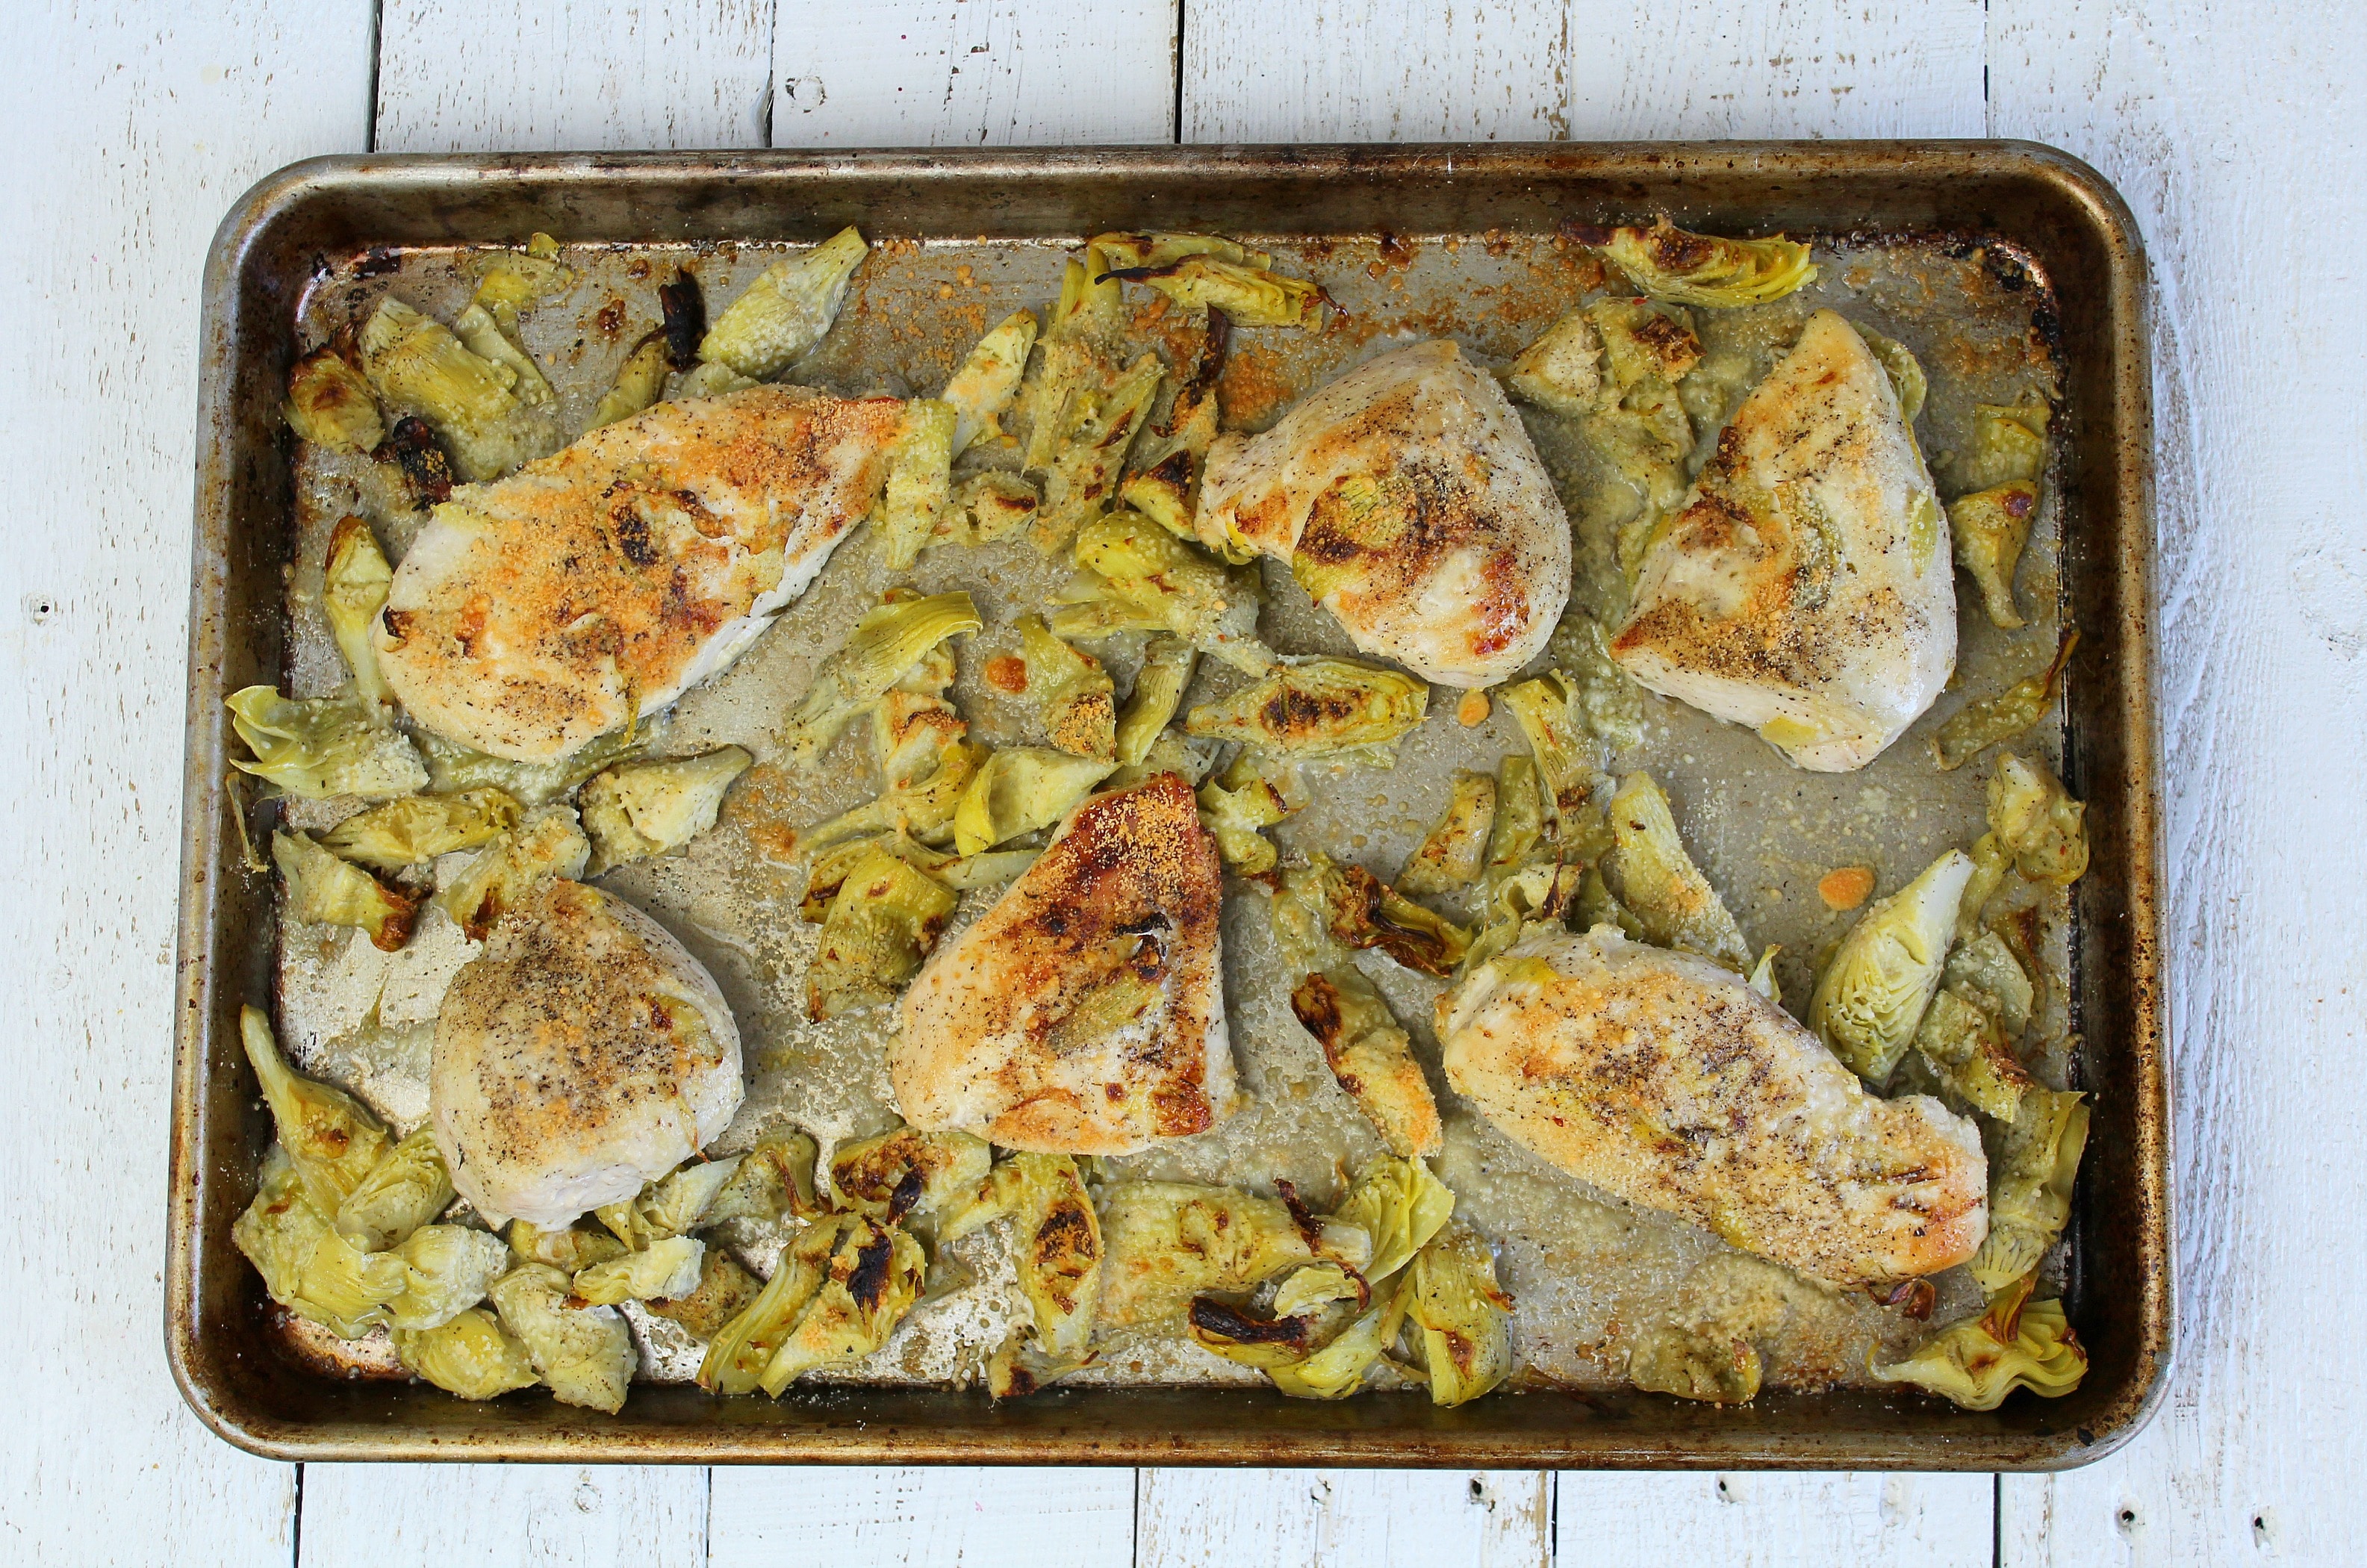 Broiling the chicken gives it a deliciously crispy crust sprinkled with parmesan cheese